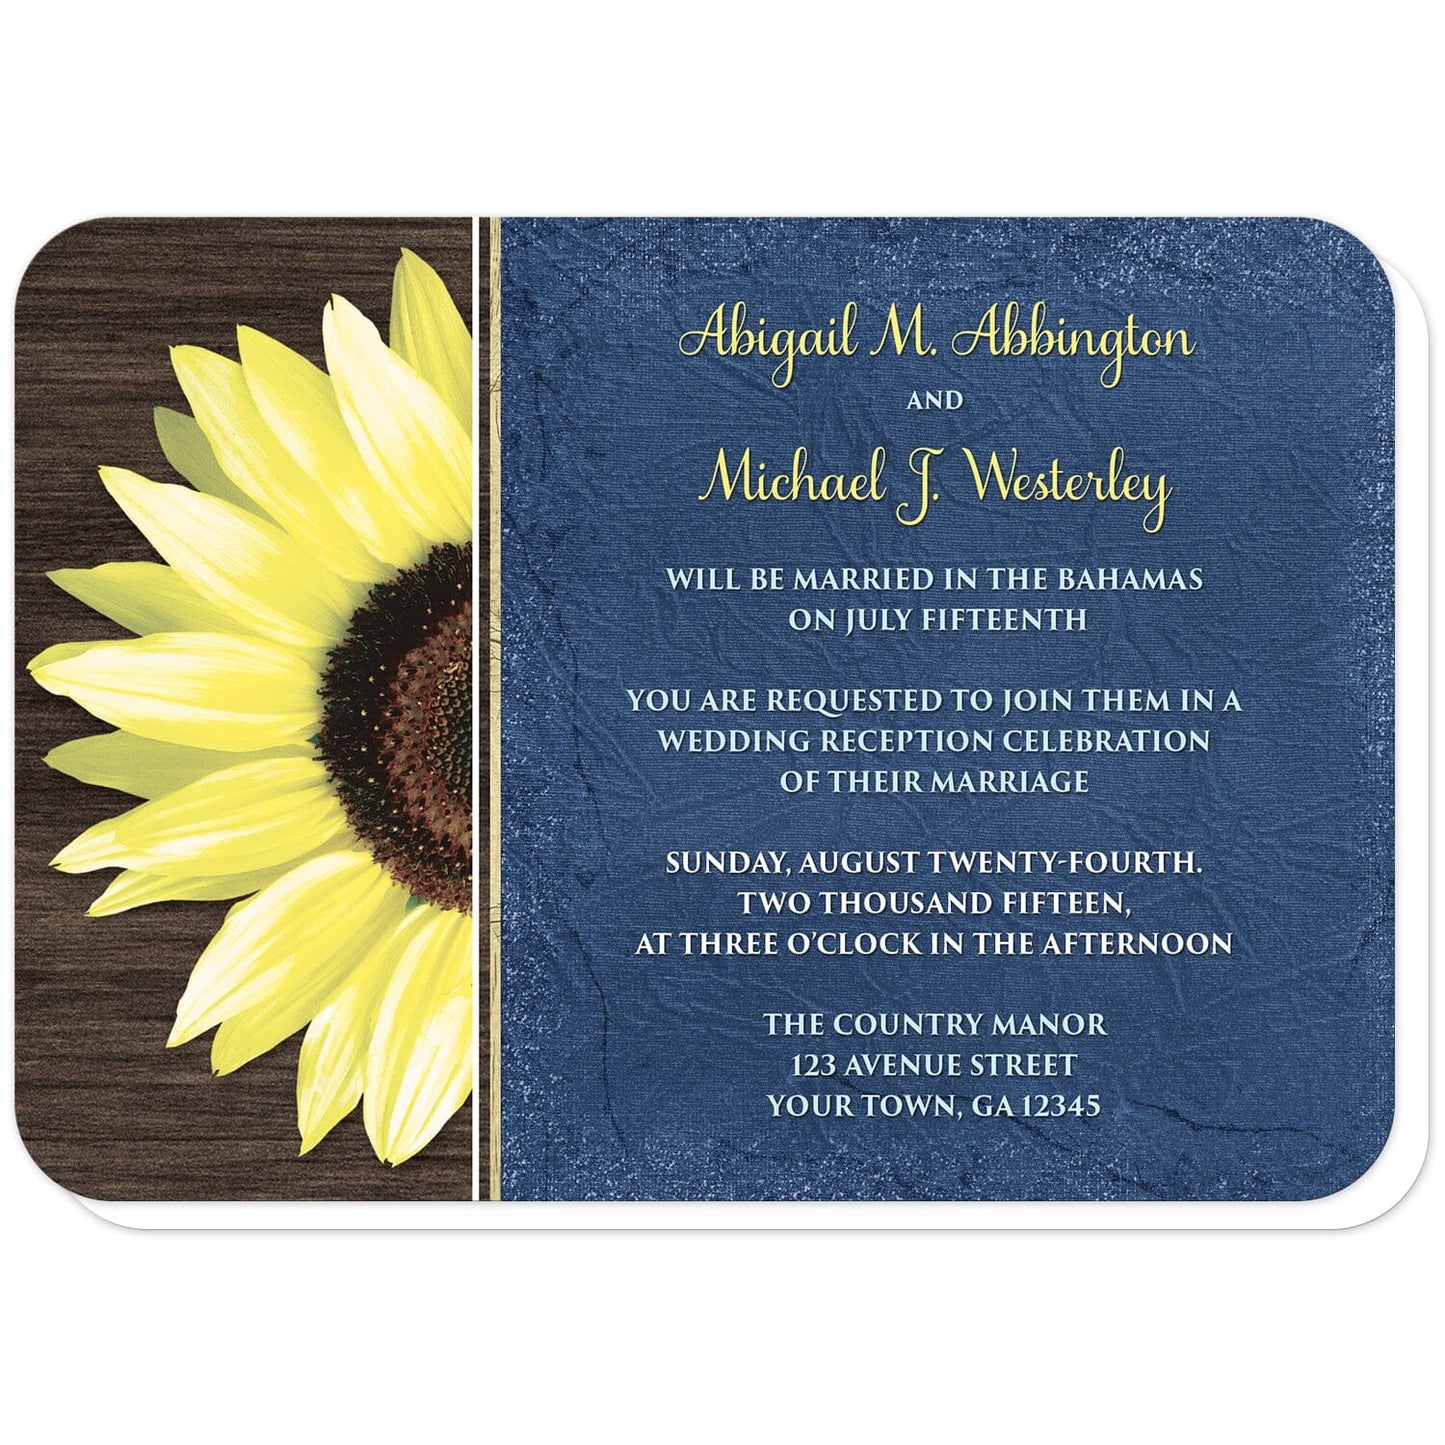 Rustic Sunflower with Blue Reception Only Invitations (with rounded corners) at Artistically Invited. Country-inspired rustic sunflower with blue reception only invitations featuring a vibrant bright yellow sunflower over a textured dark brown wood design along the left side. Your personalized post-wedding reception details are custom printed in yellow and white over a tattered blue cloth illustration to the right of the sunflower.